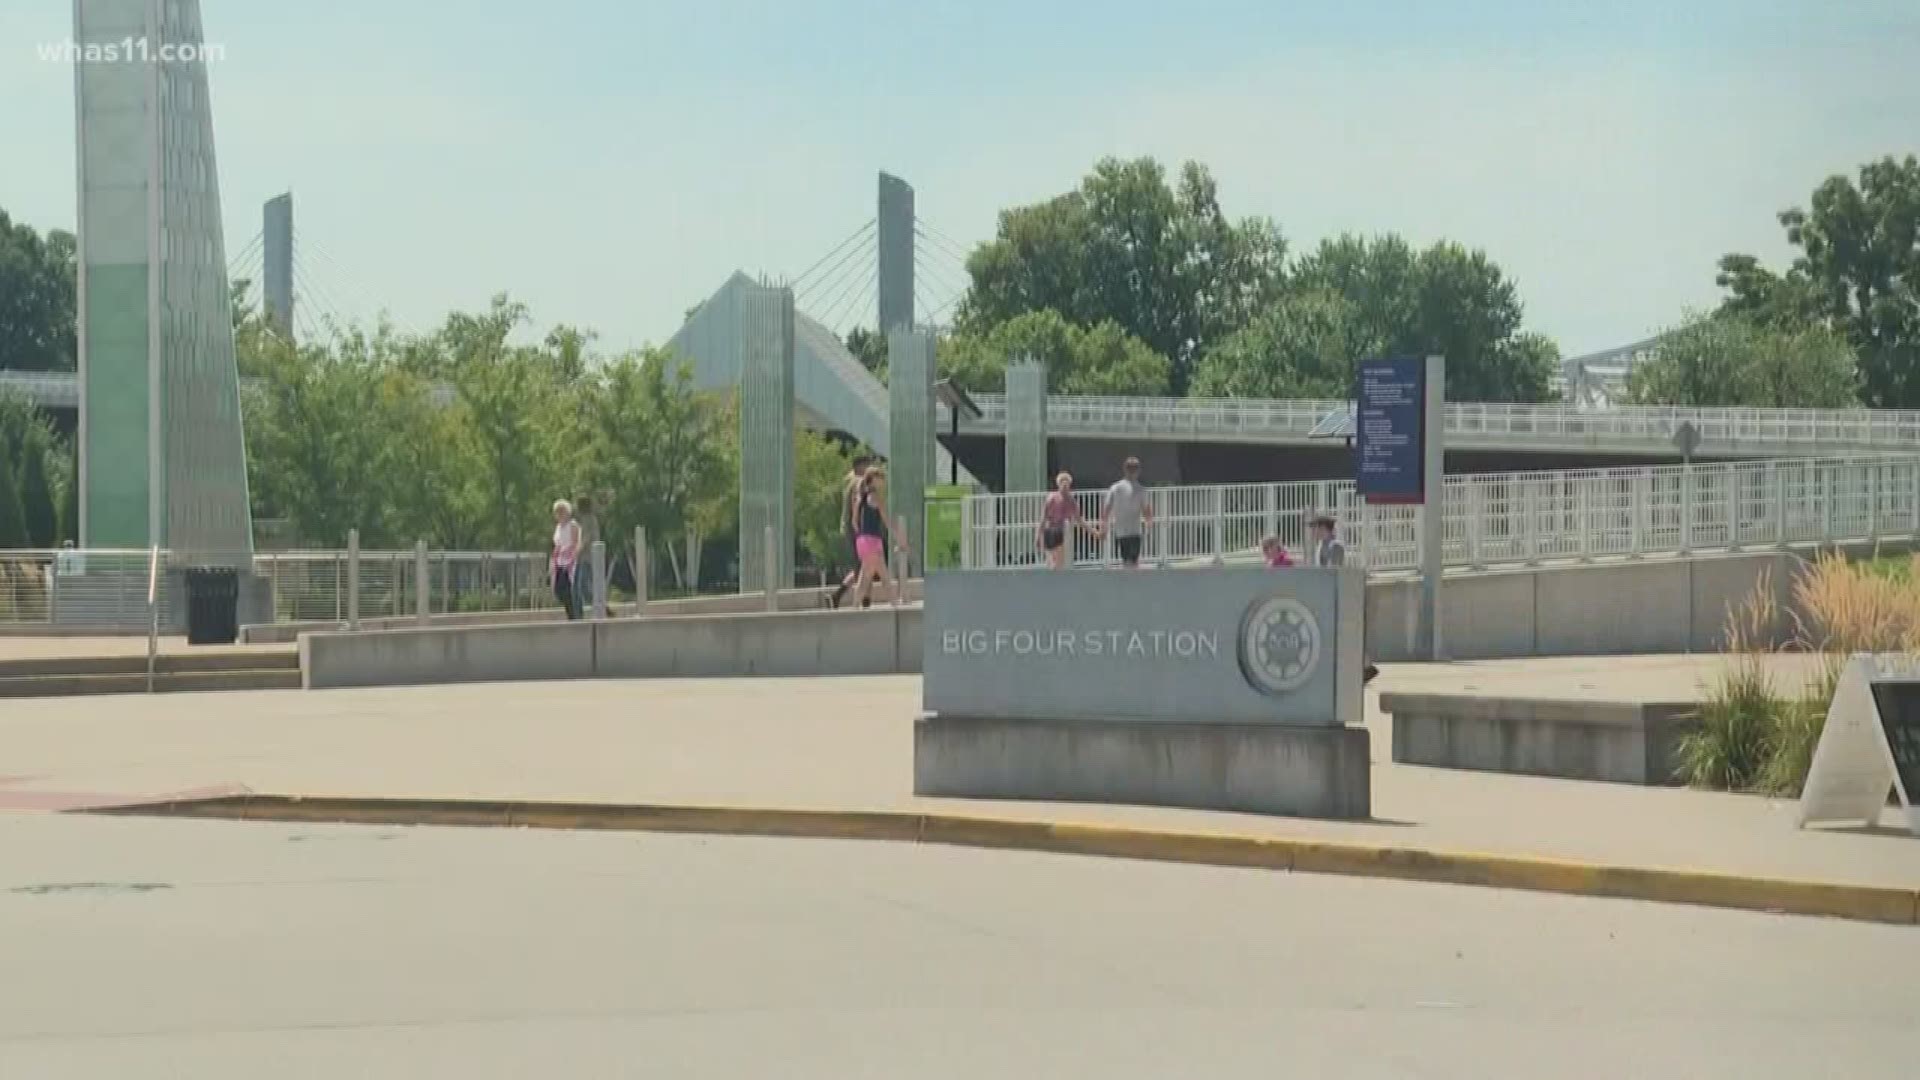 A new entertainment venue could soon be coming to Jeffersonville.